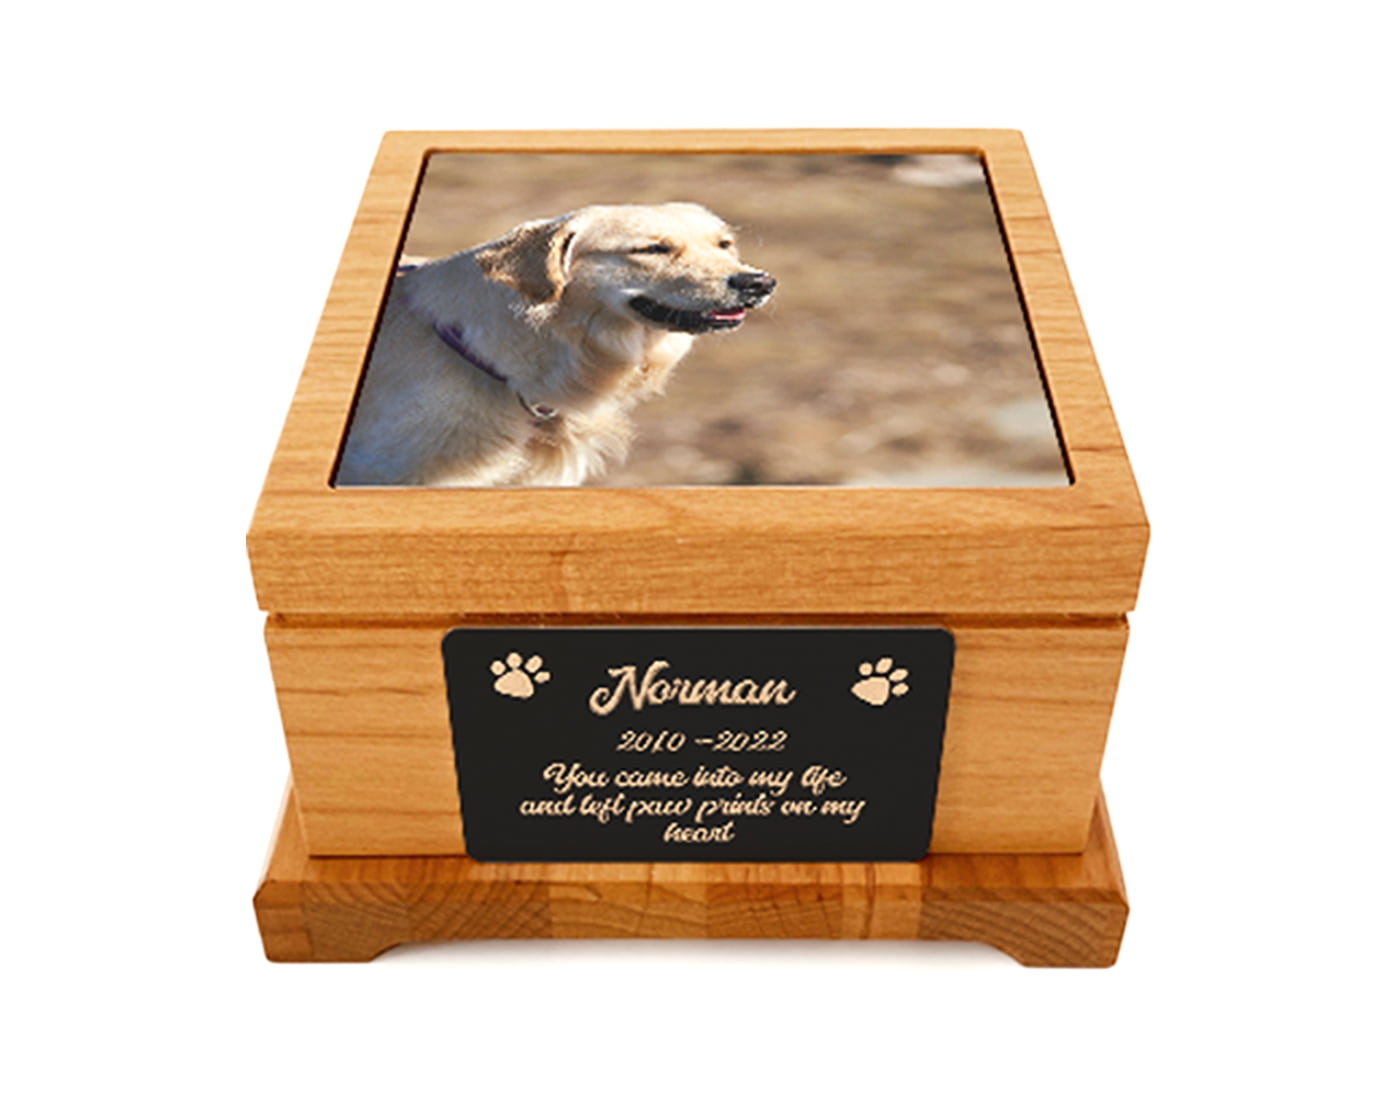 Personalized Pet Urns - For Your Pet's with Custom Photo Tributes